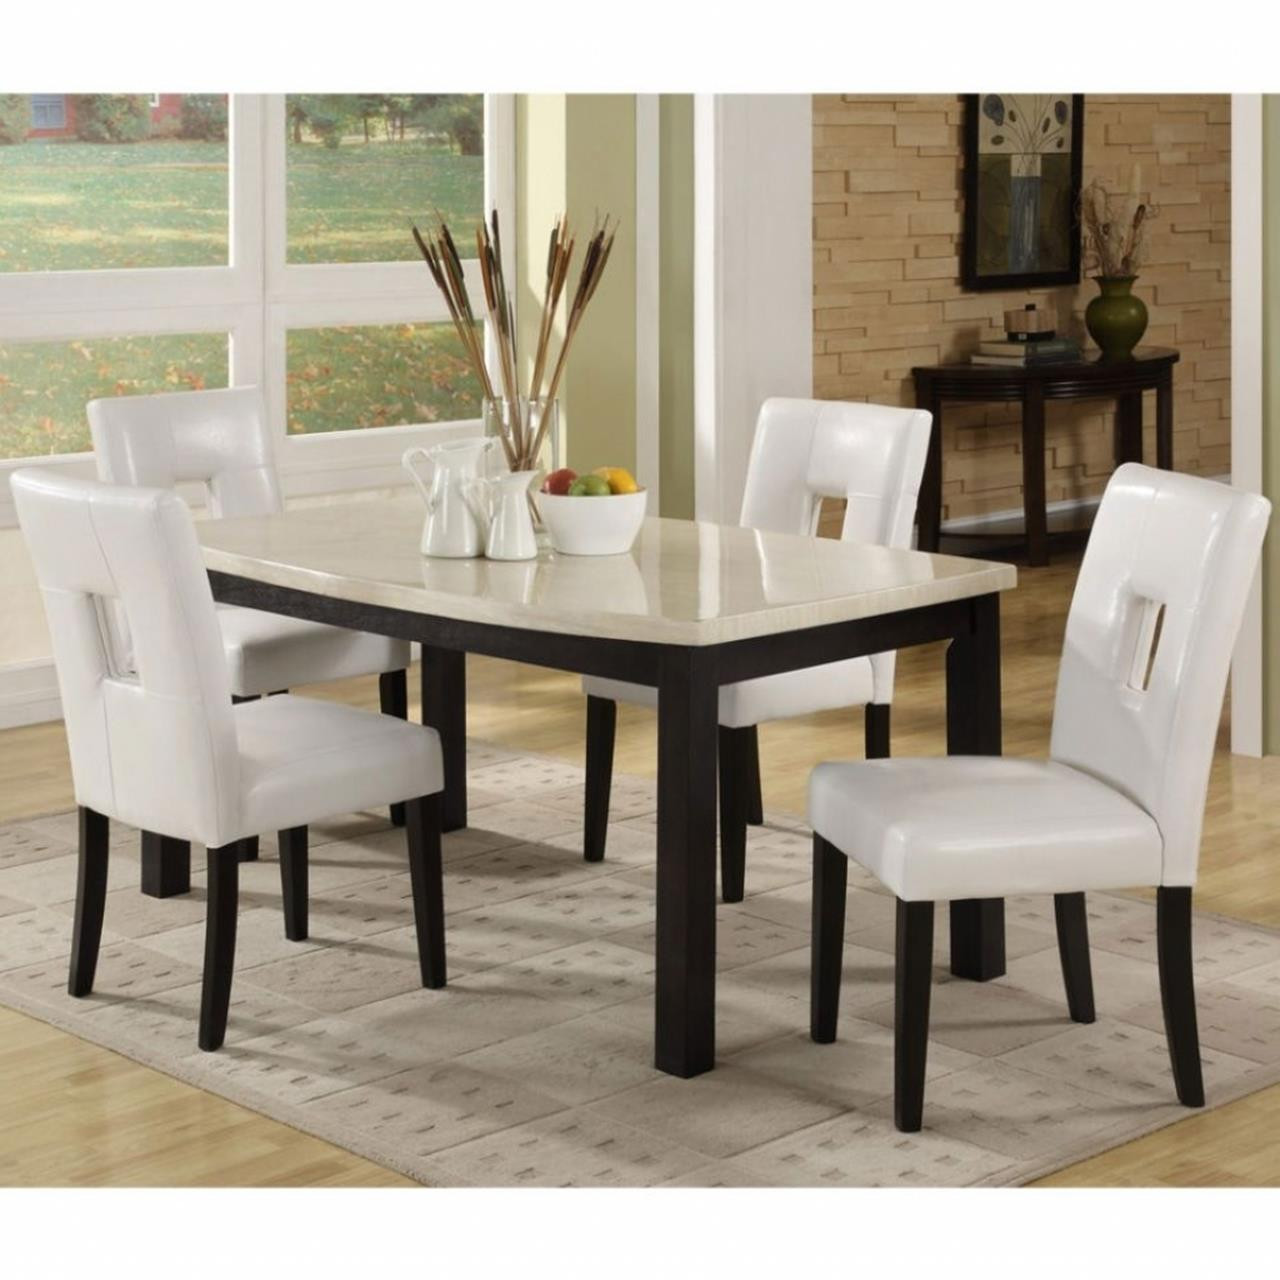 Small Space Kitchen Table Sets
 Best 39 Perfect Kitchen Table Sets For Small Spaces